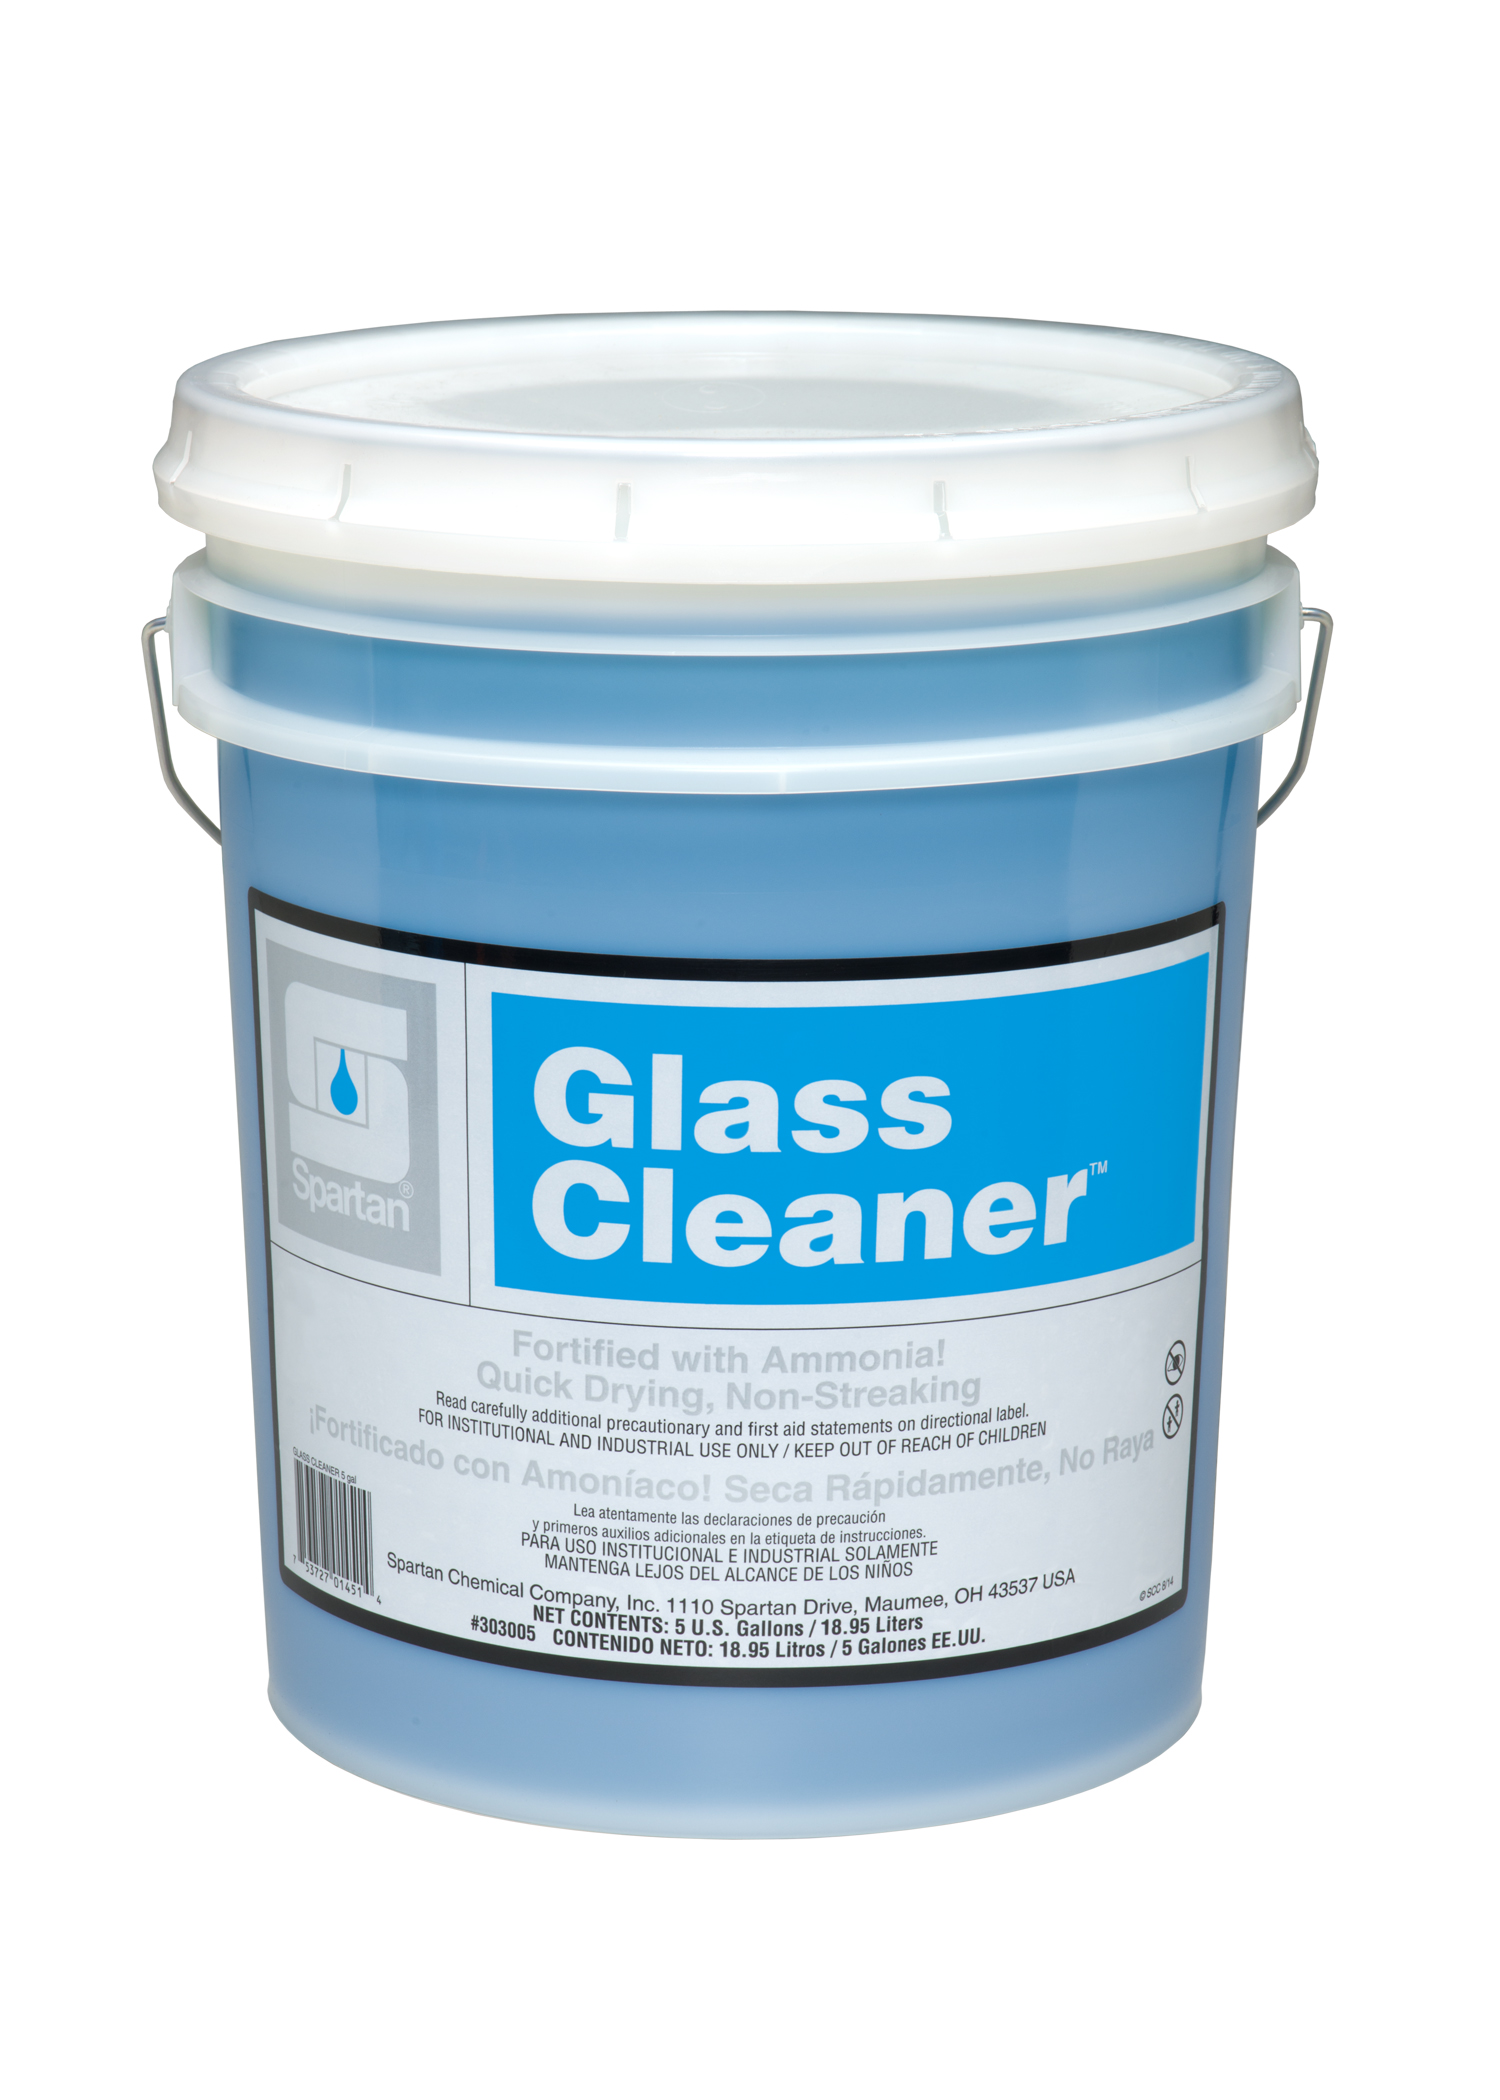 Glass Cleaner 5 gallon pail